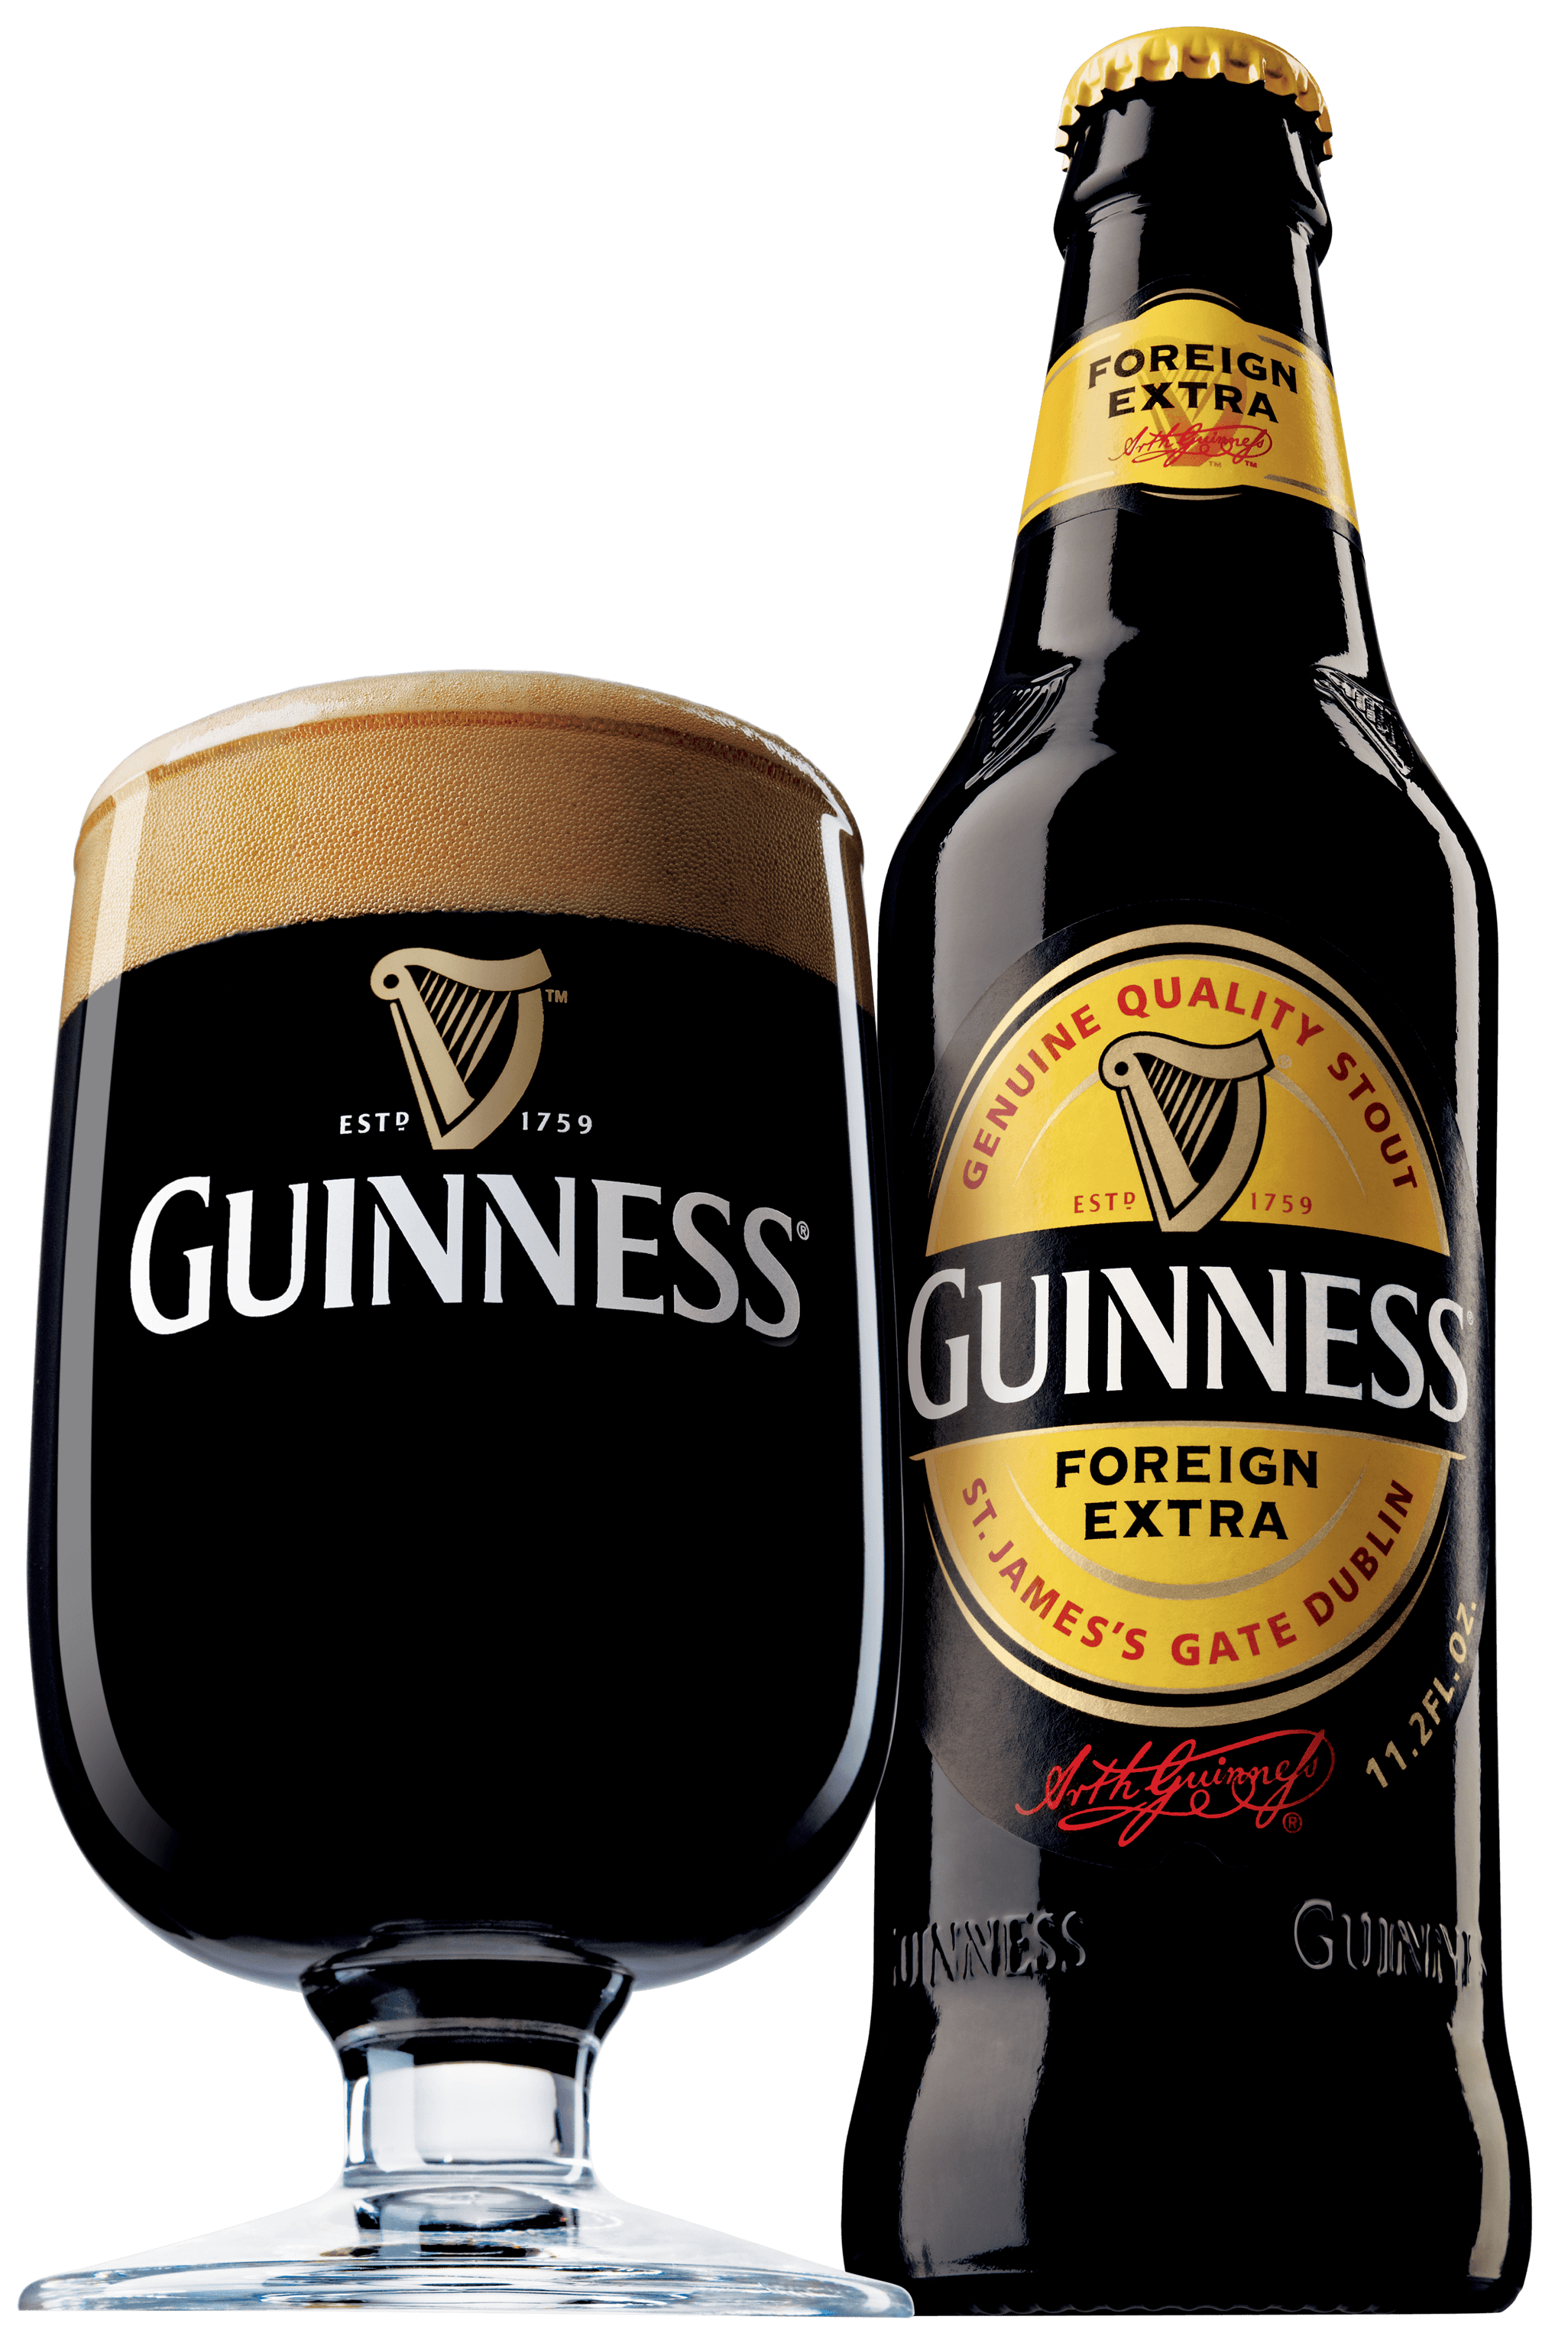 Guinness Bottle Logo - Jamaican Carrot Juice With Guinness Stout Beer Mixed Carrot Juice Recipe